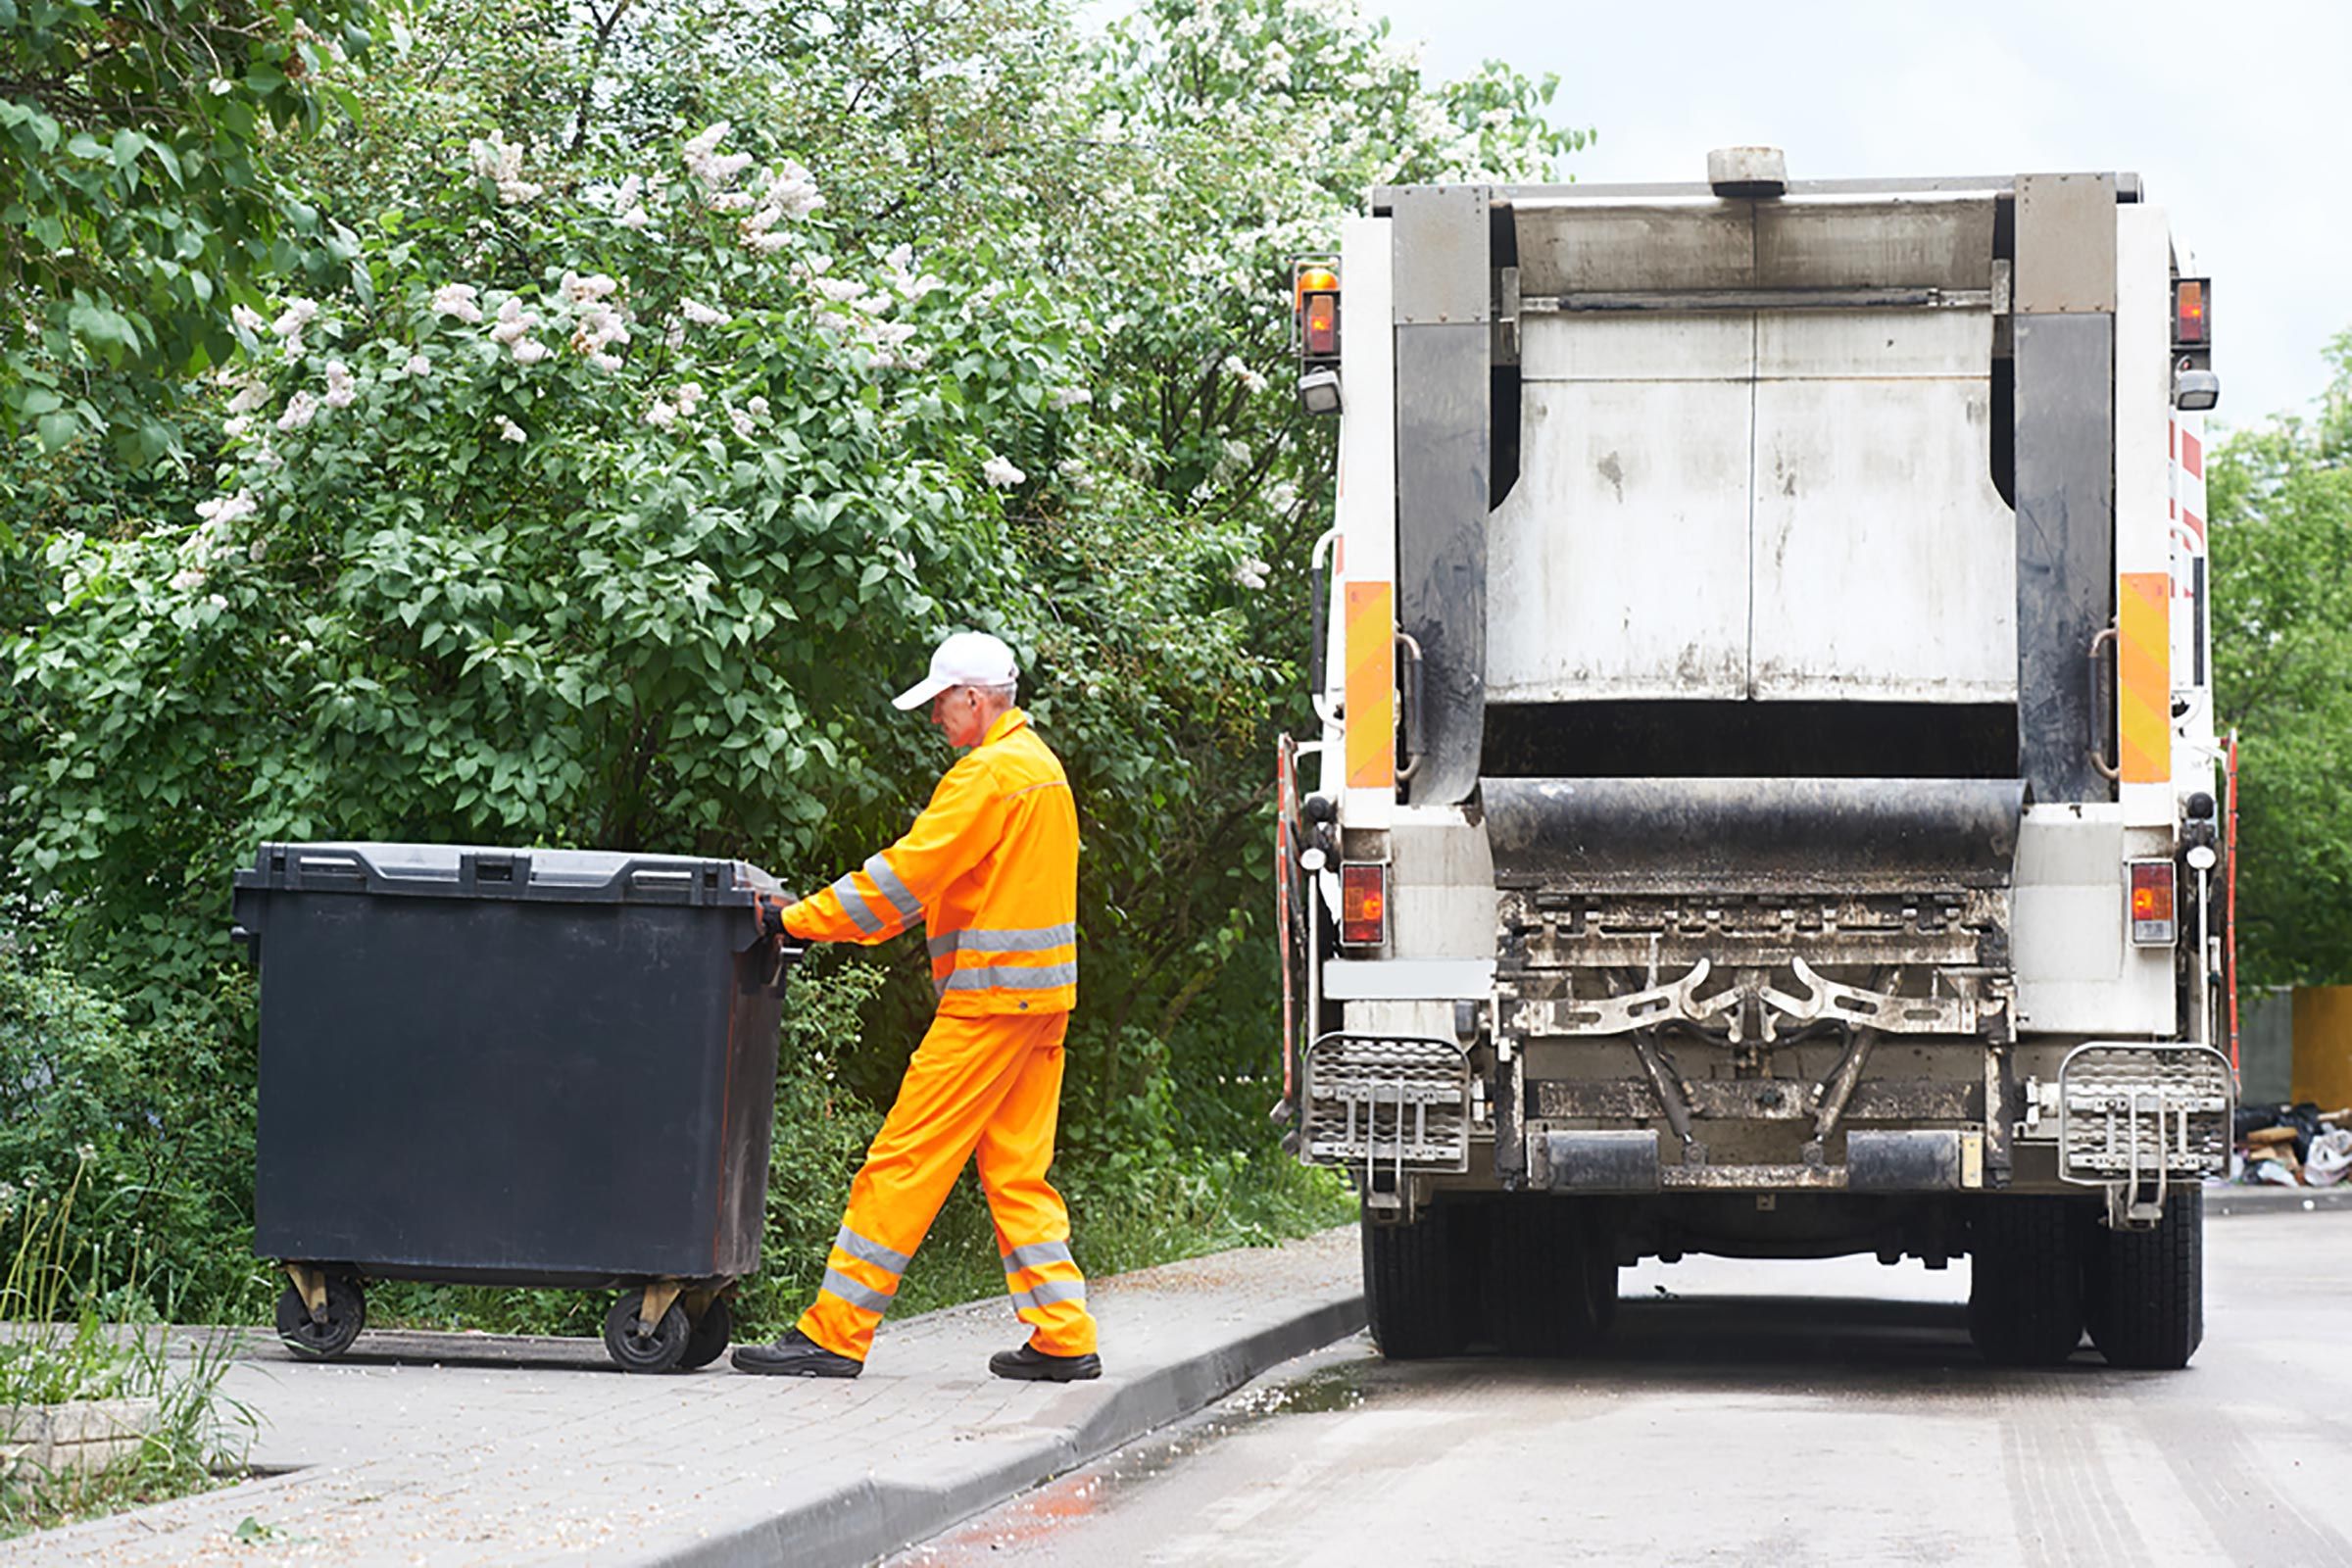 How Professional Waste Disposal Makes a Difference